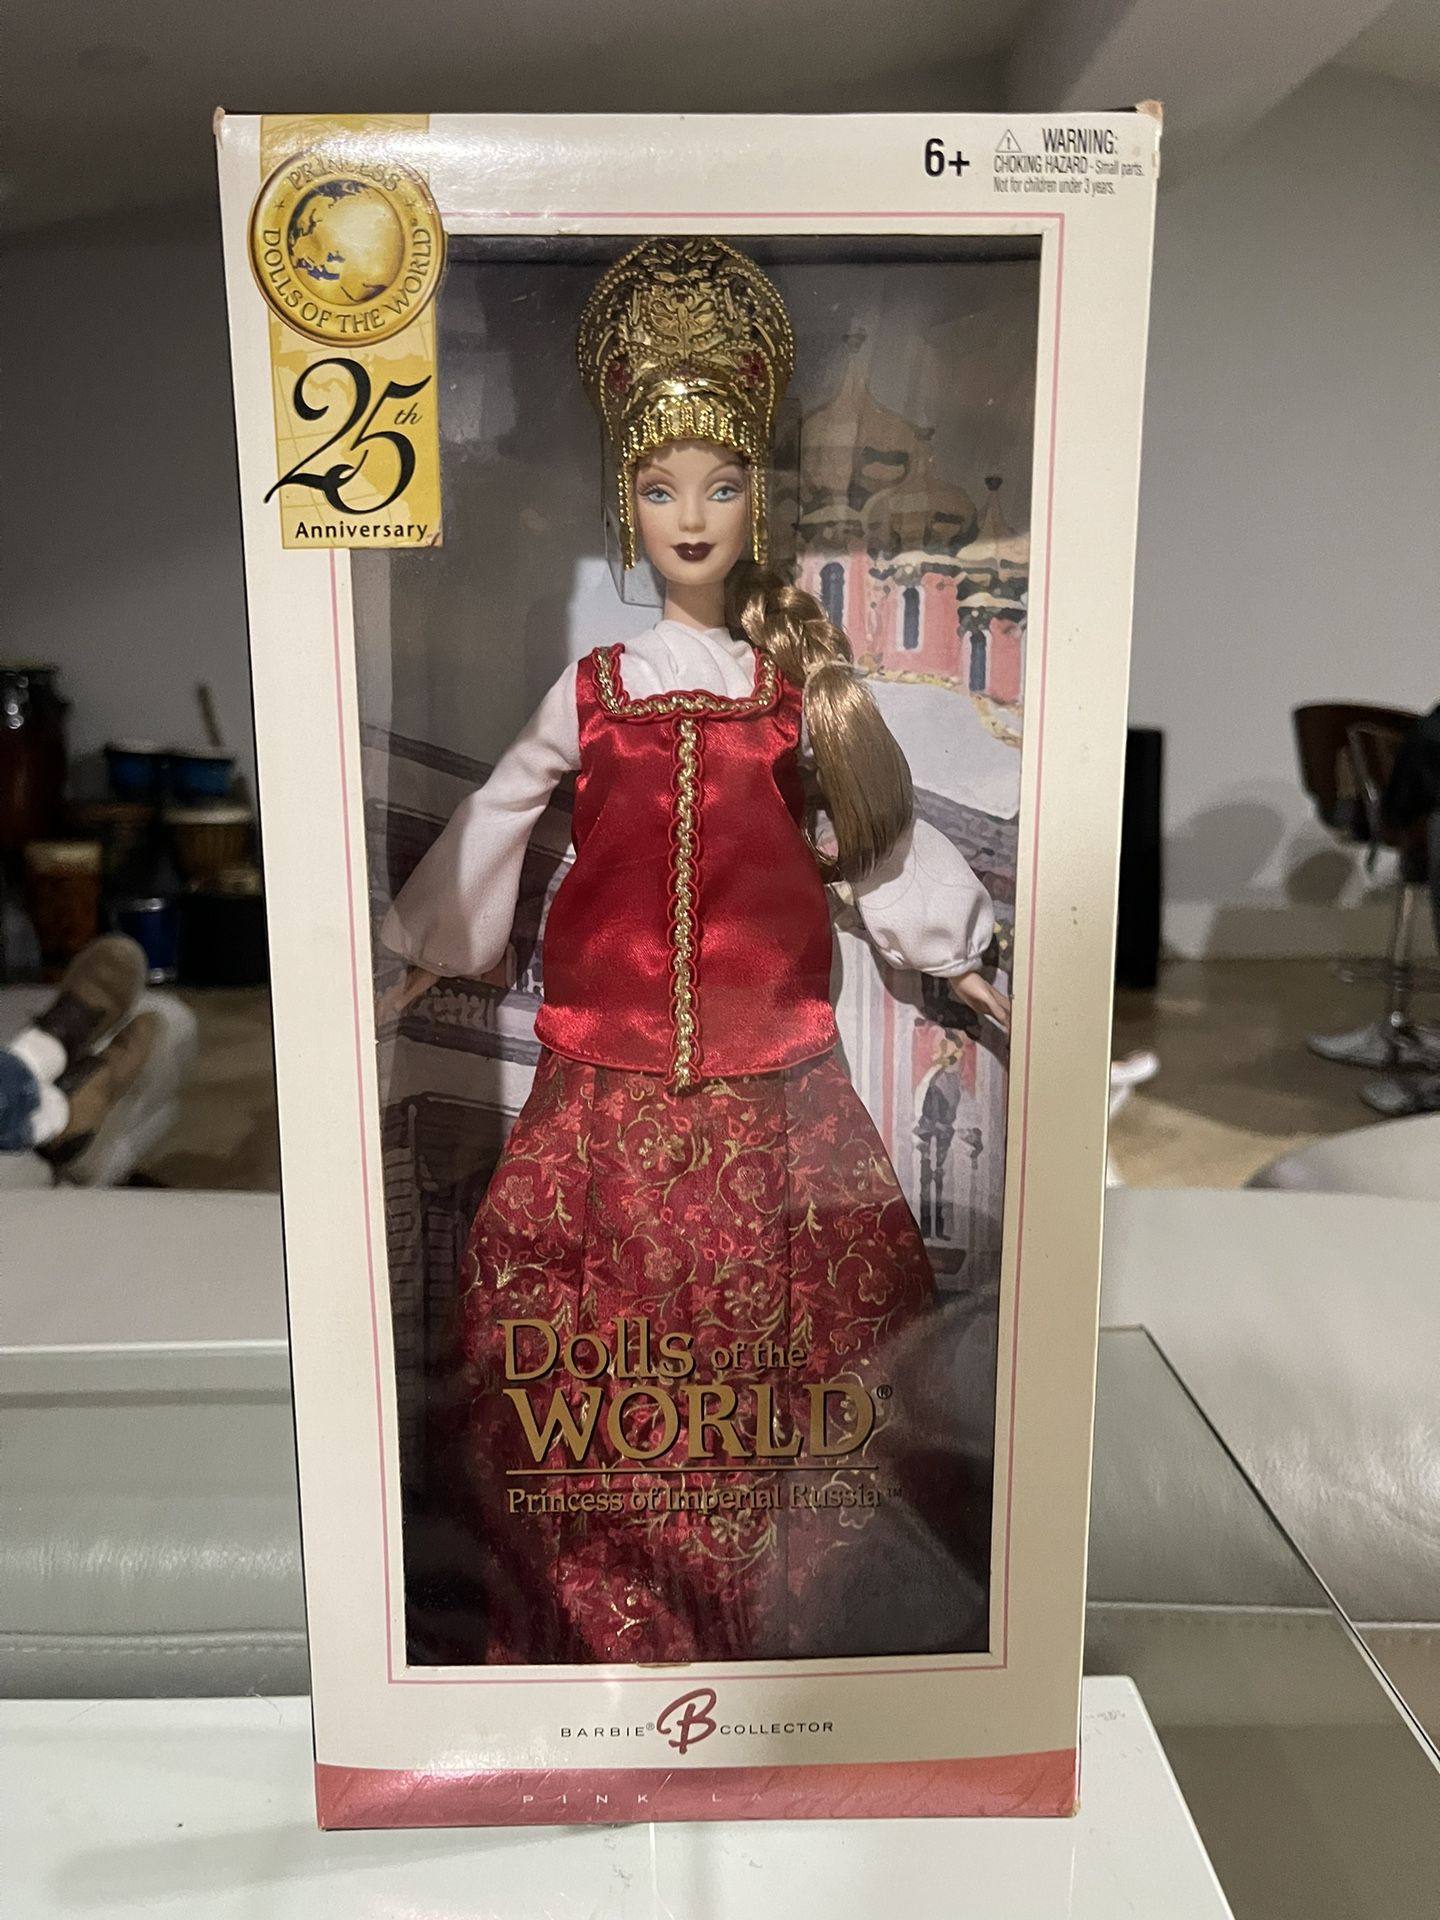 Mattel Barbie Dolls of the World Princess of Imperial Russia 25th Anniversary